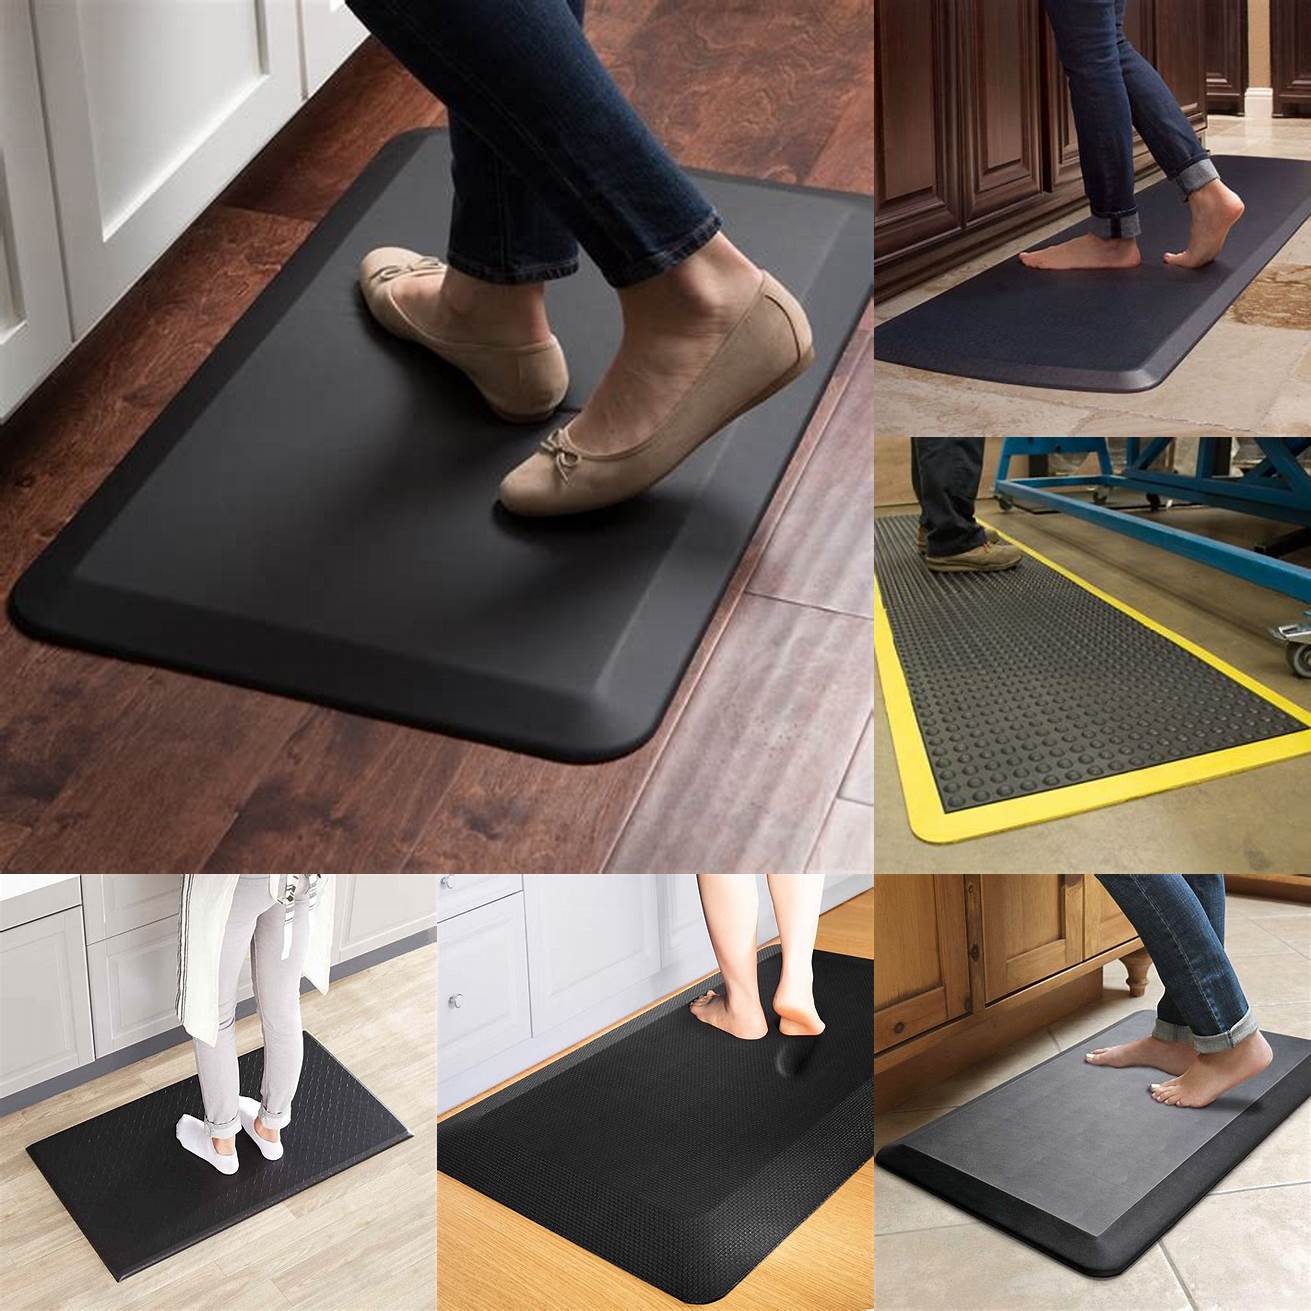 Anti-fatigue mats - Anti-fatigue mats are designed to reduce the strain on your feet and legs They are made of a cushioned material that provides support and comfort